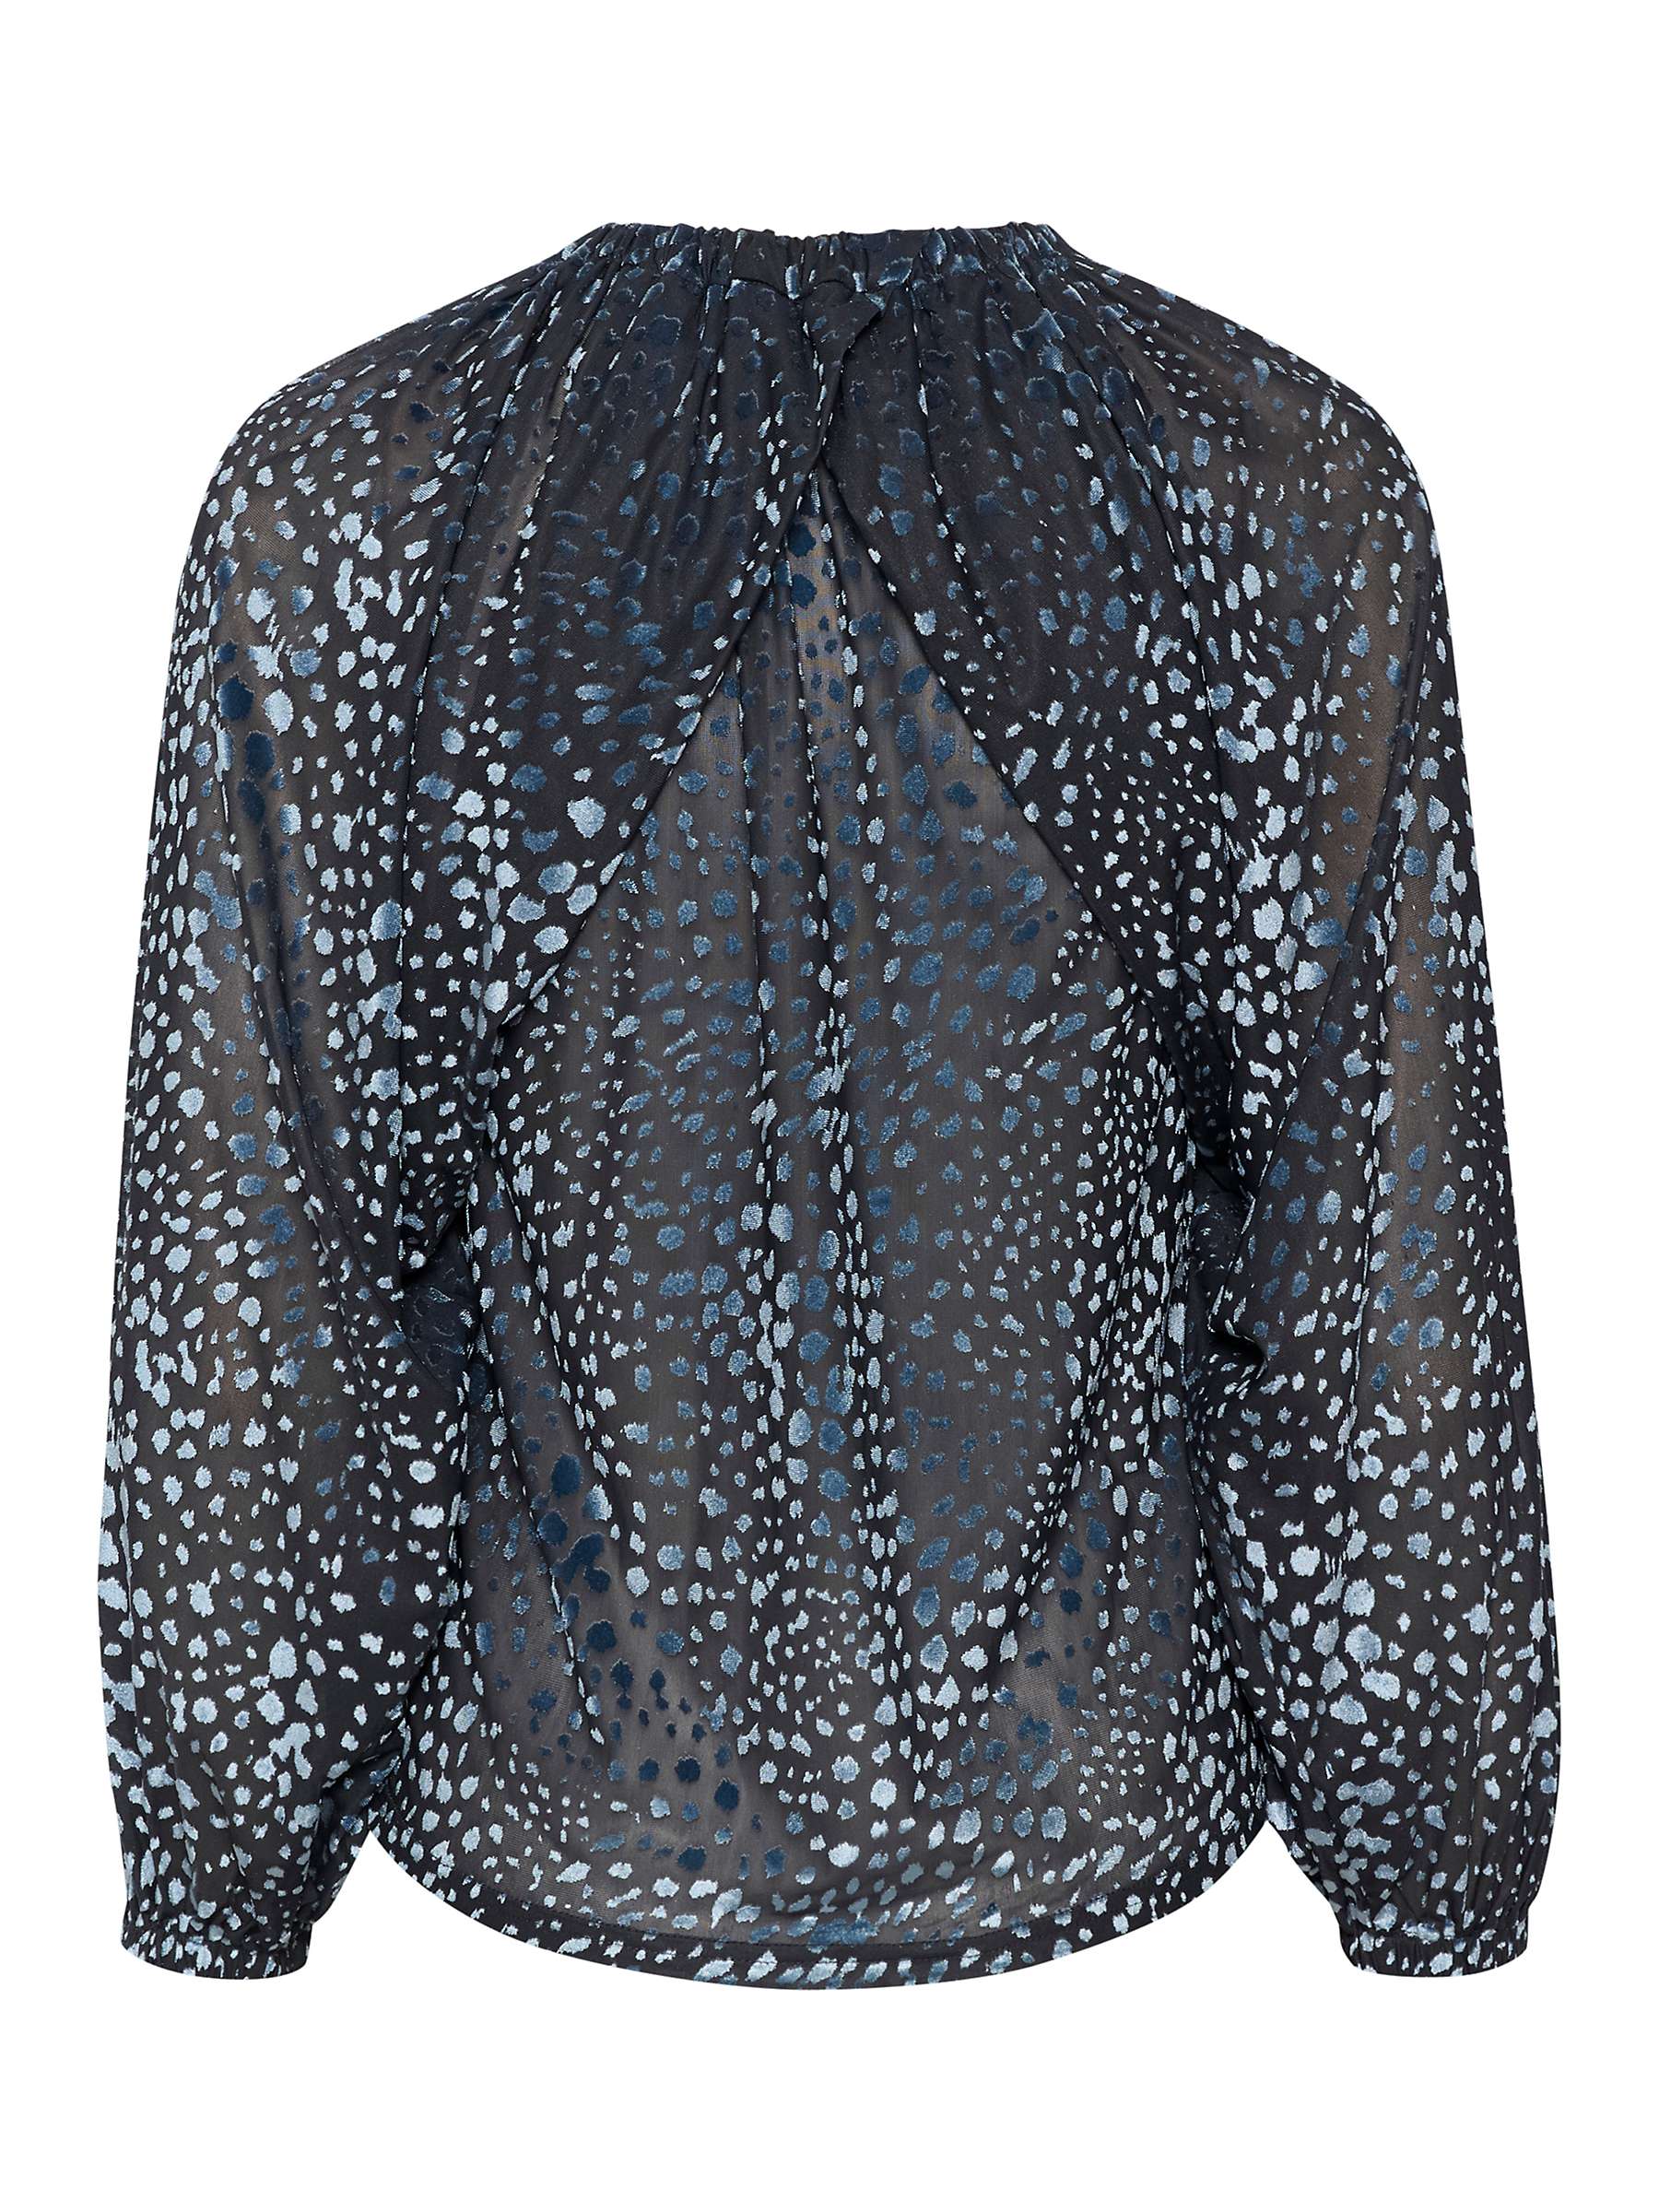 Buy Soaked In Luxury Nicha Blouse, Faded Denim Burn Out Online at johnlewis.com